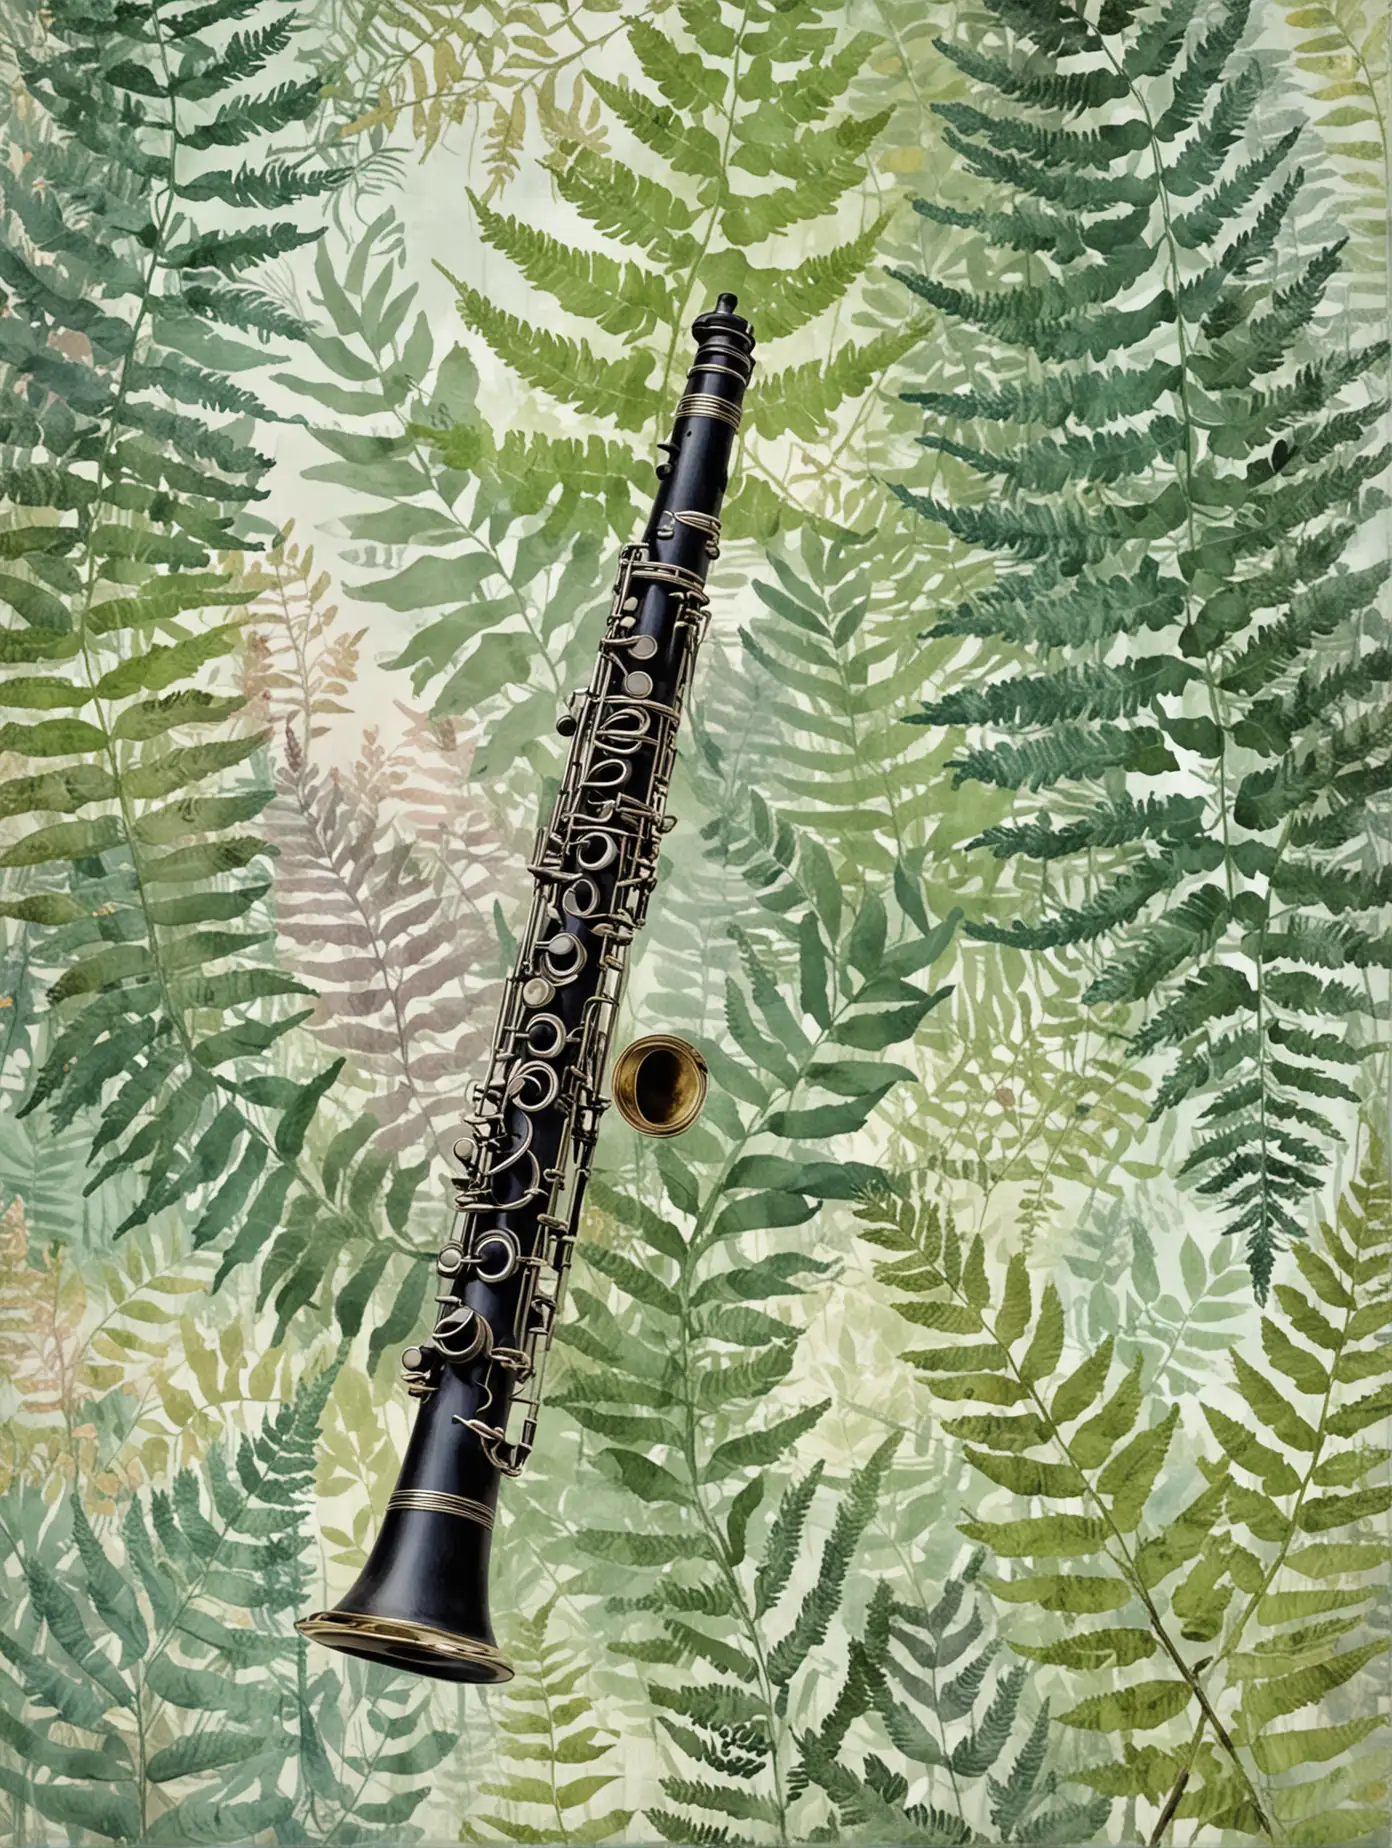 Dreamy Spring Serenade Clarinet with Impressionist Floral Motifs and Fern Leaves